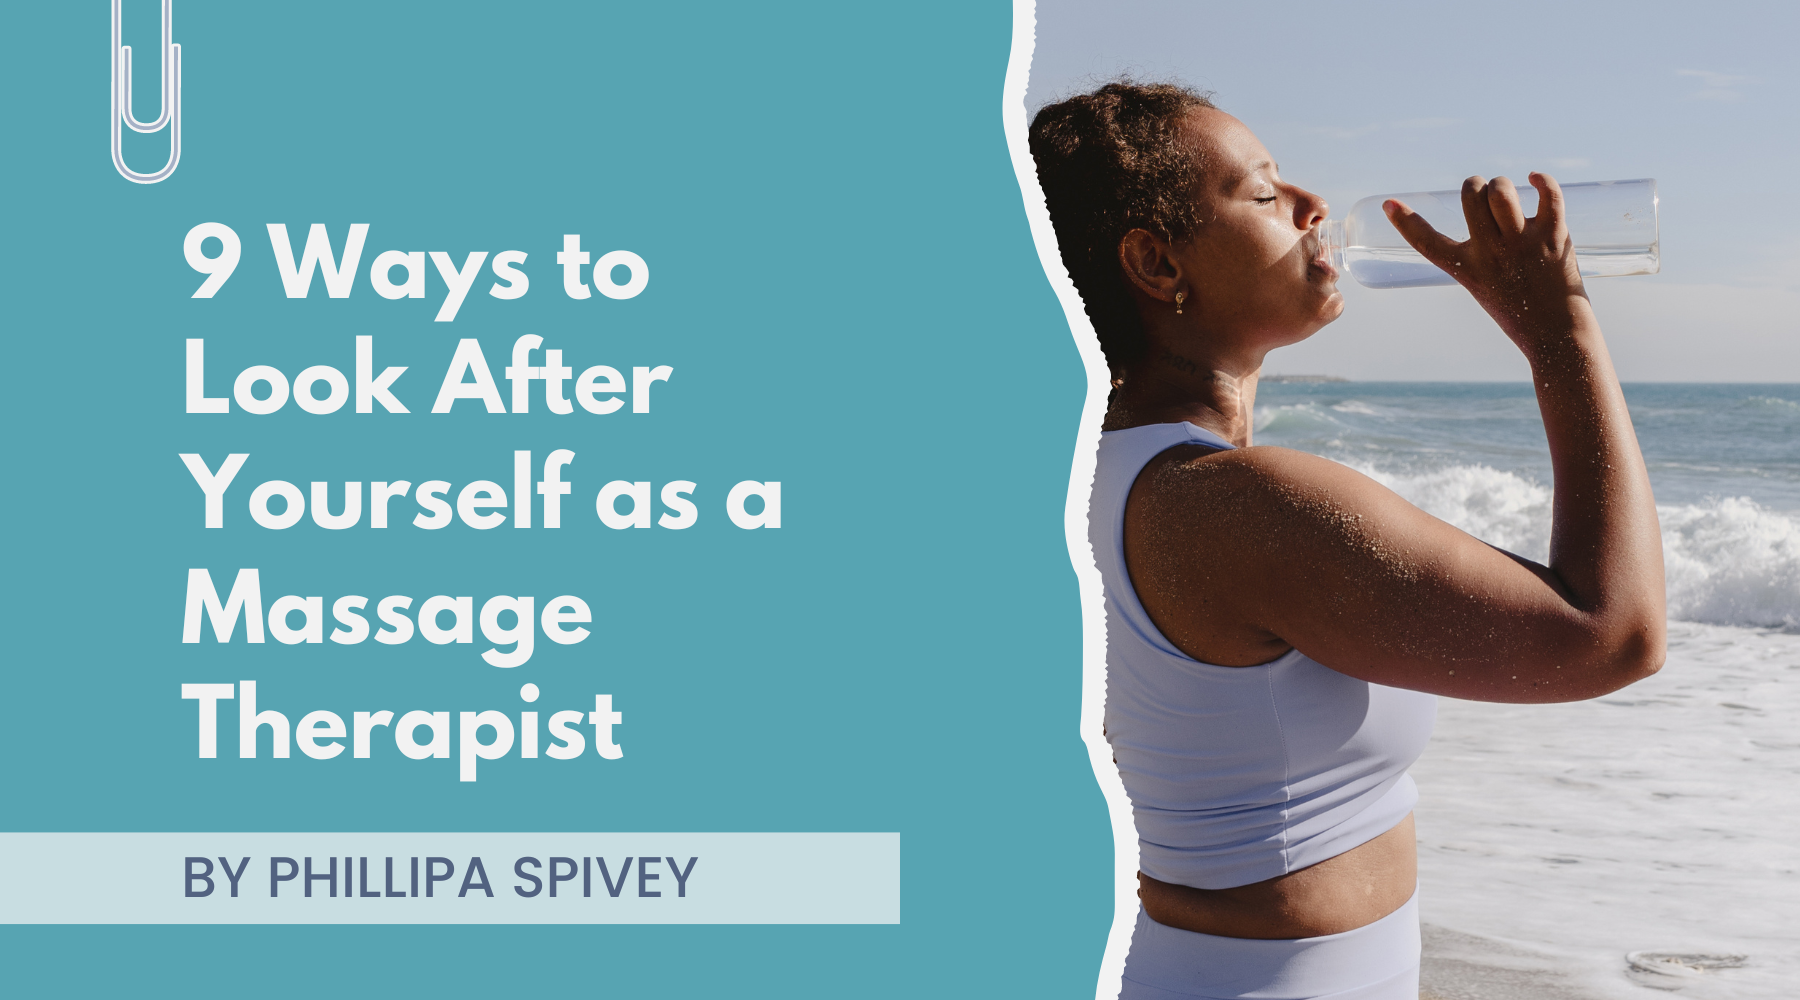 9 Ways to Look After Yourself as a Massage Therapist